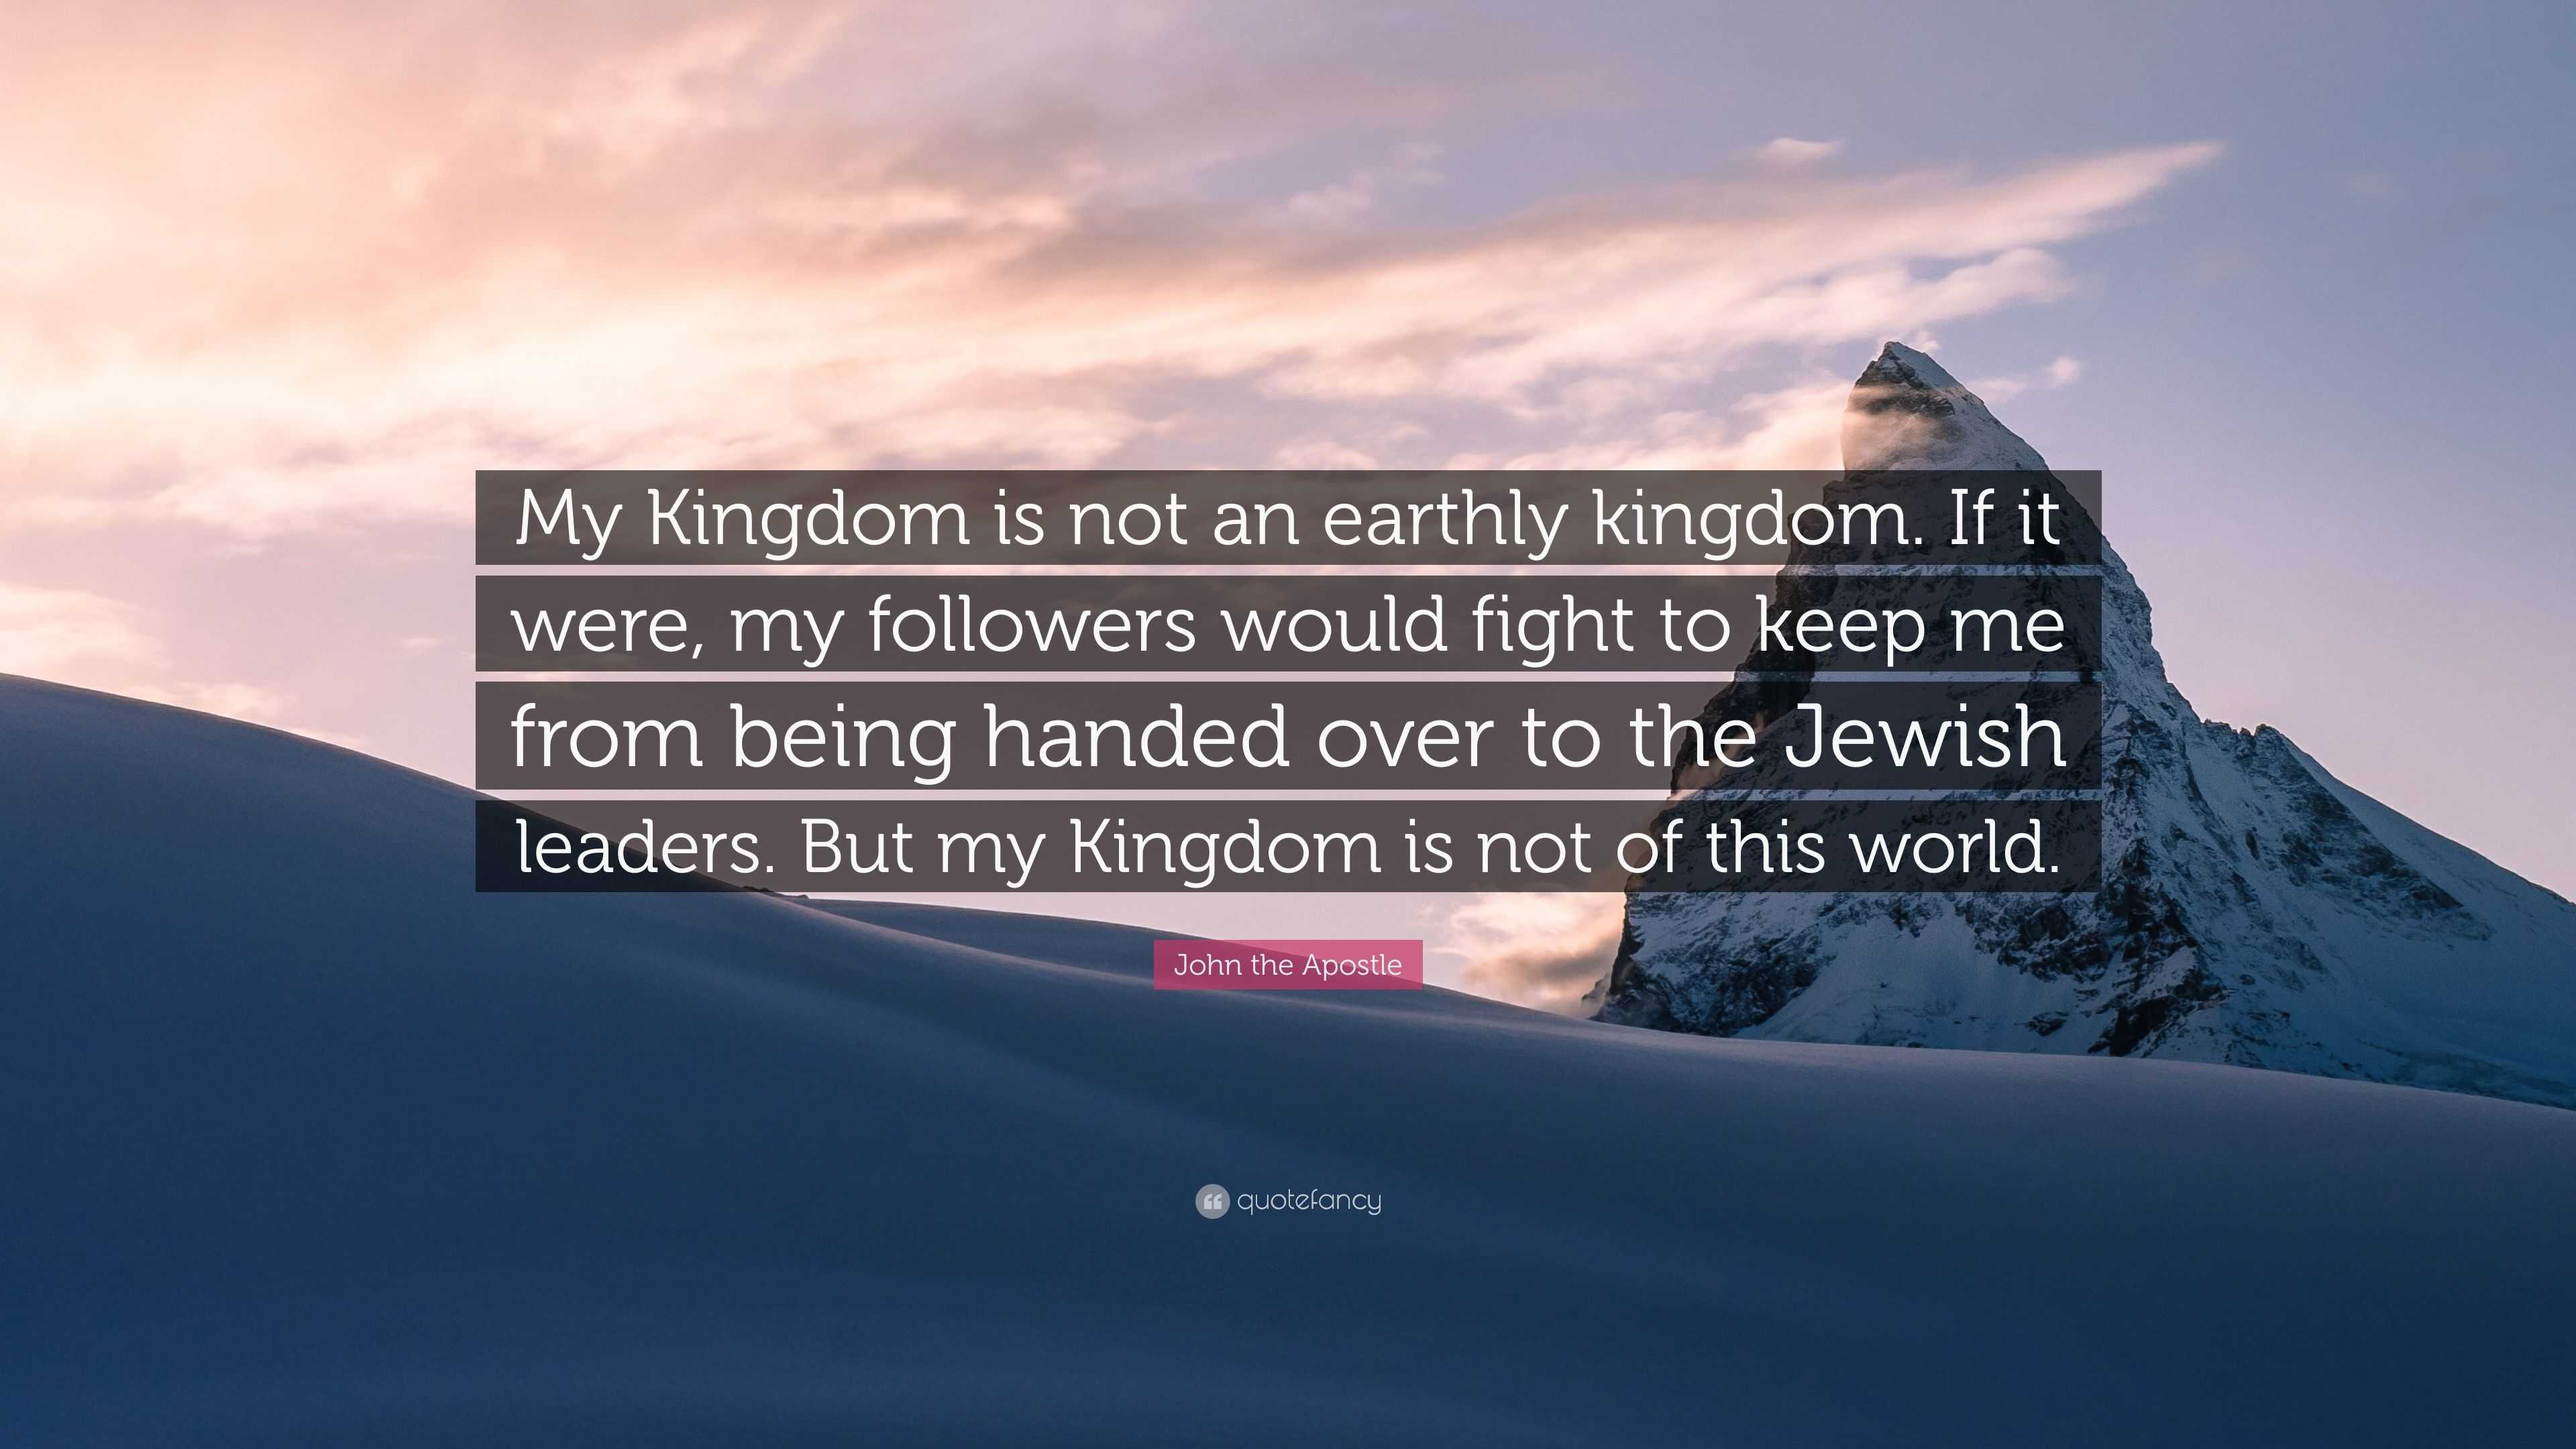 John the Apostle Quote: “My Kingdom is not an earthly kingdom. If it were,  my followers would fight to keep me from being handed over to the Jewi”